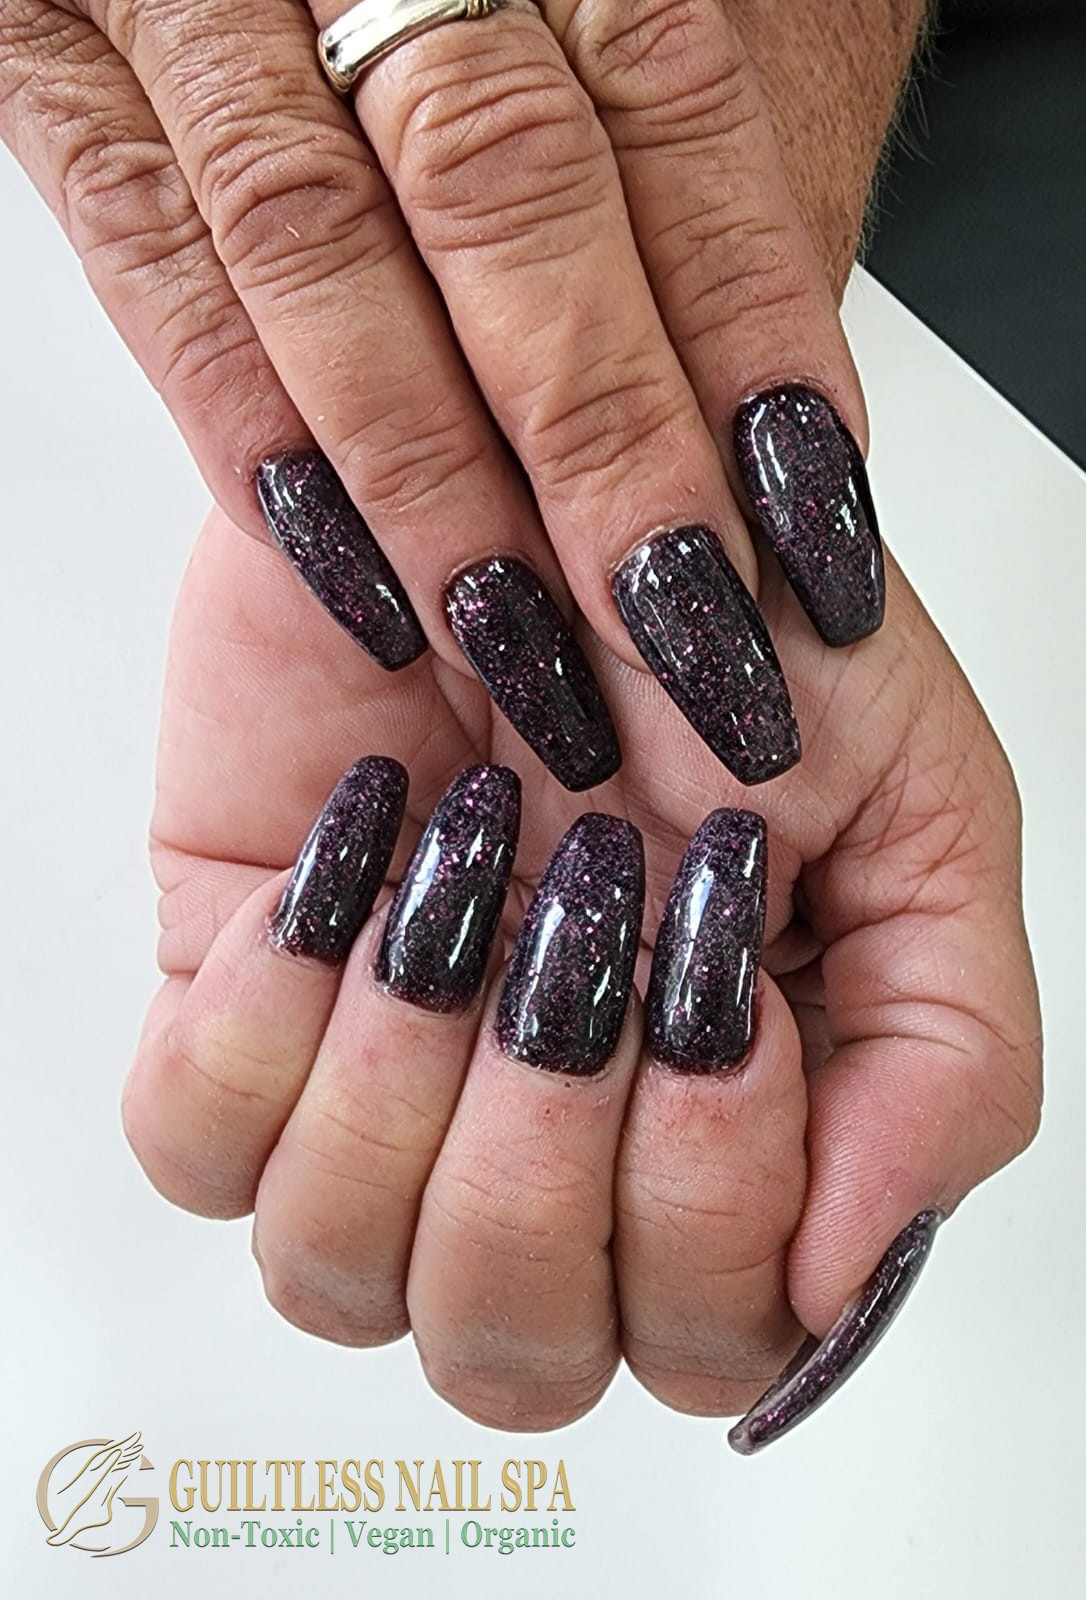 Dipping Coffin Shape on Natural Nails by Zenda